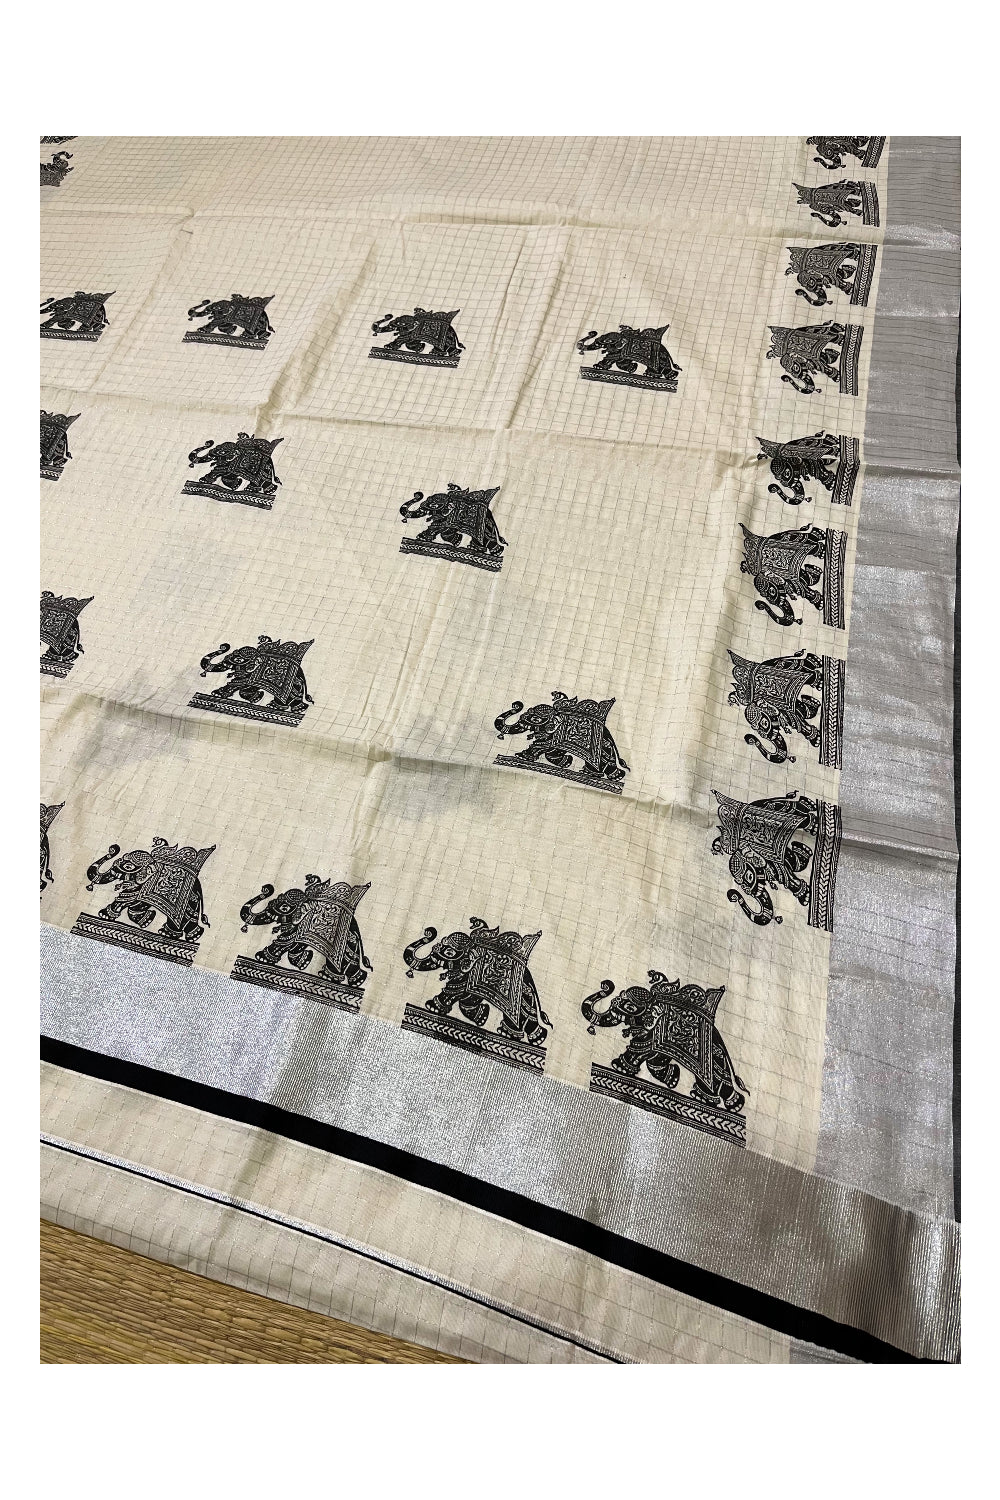 Southloom Silver Check Saree with Black Border and Elephant Block Prints